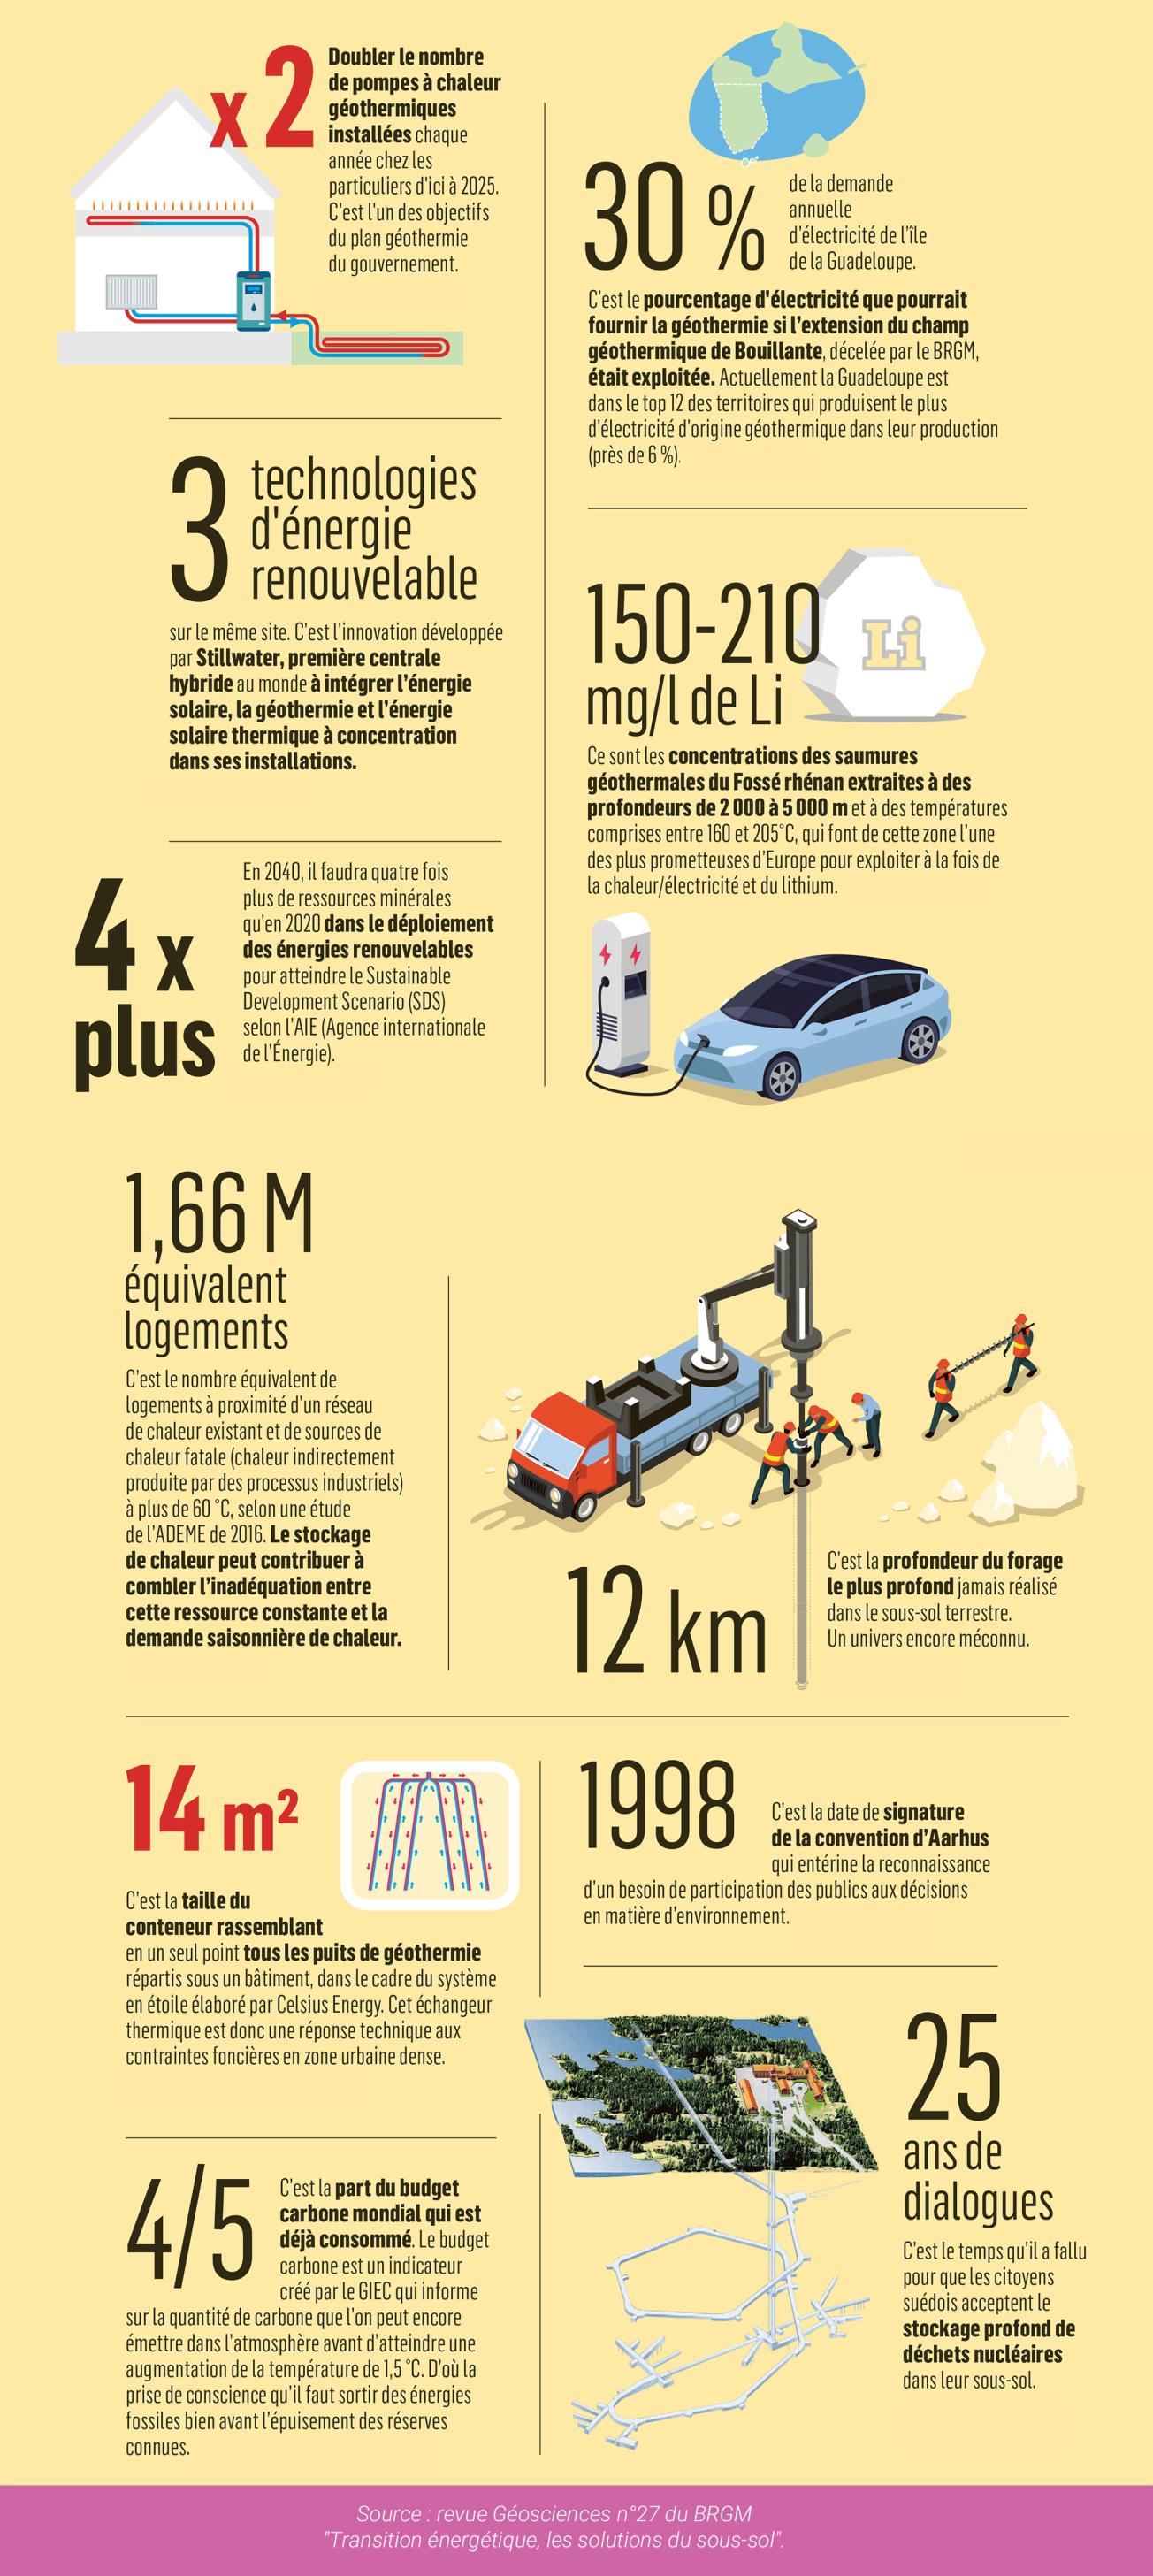 "Key figures" infographic from Géosciences journal, issue 27, entitled "Subsurface solutions for the Energy Transition".